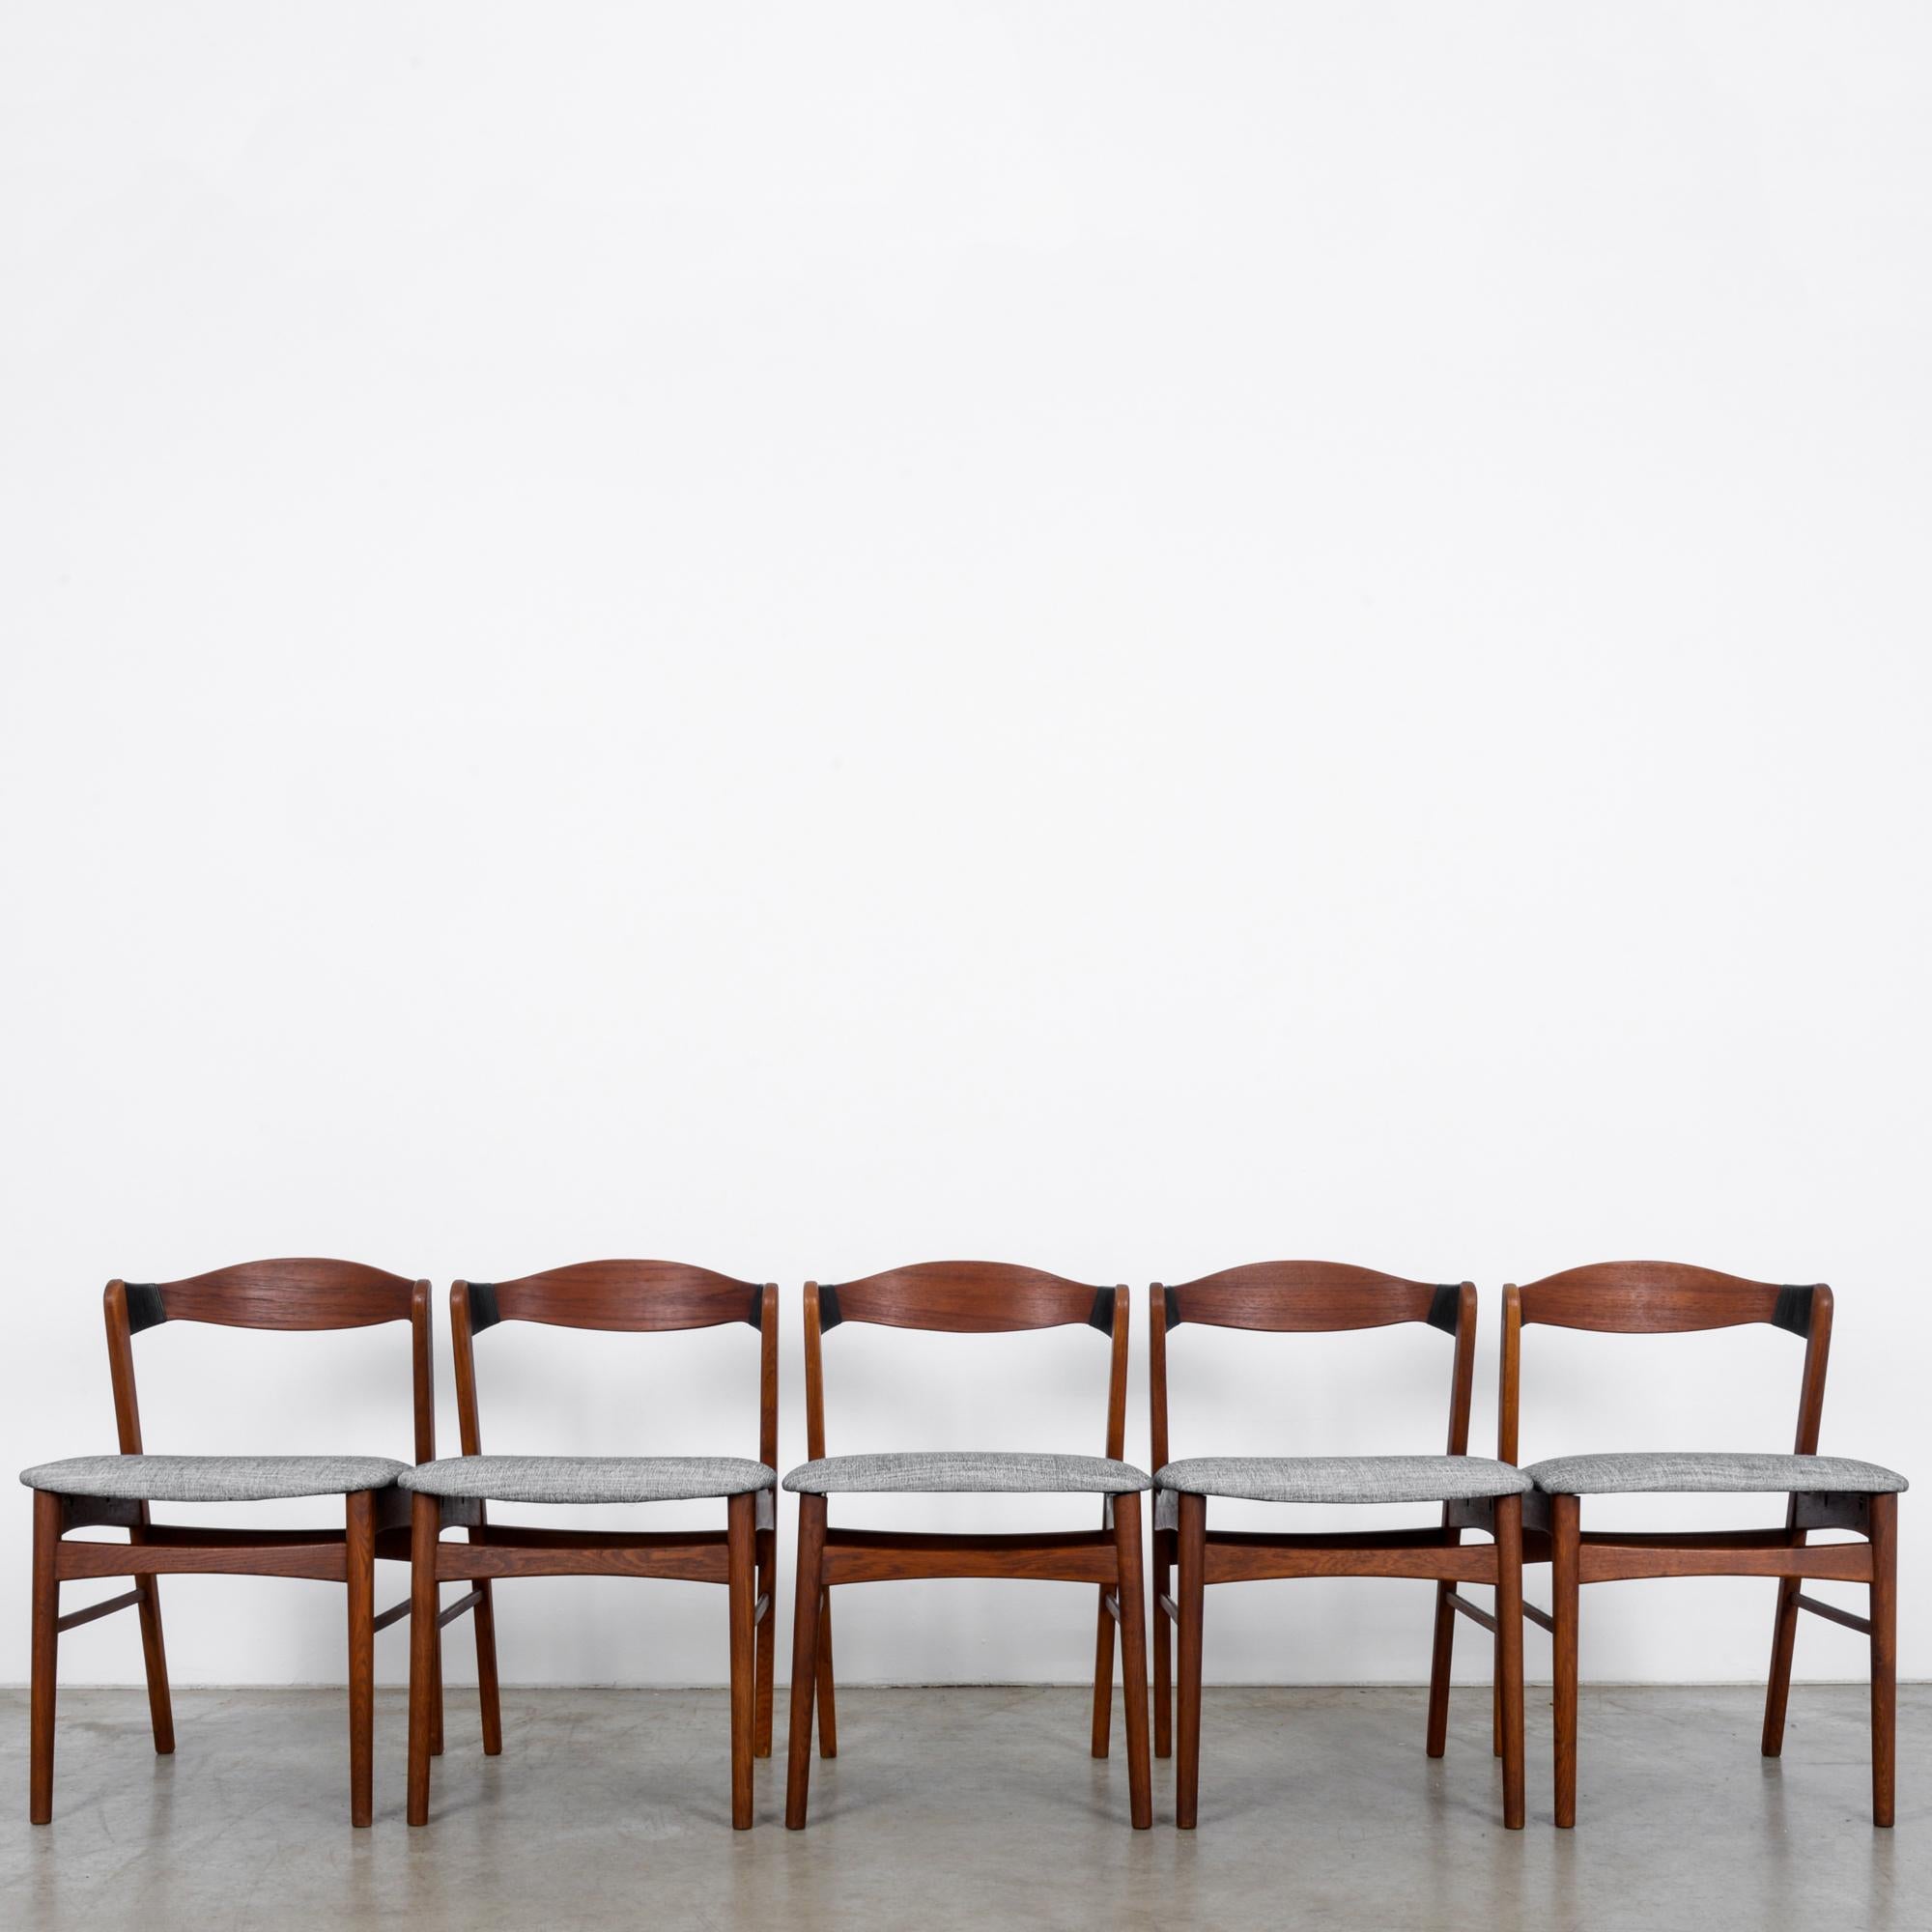 This set of five modern upholstered teak chairs from Denmark—circa 1960—features black accents on swooping seat backs lightly hovering over seats re-upholstered in textured gray, like a 1950s black and white star. Simple strut linking the softly